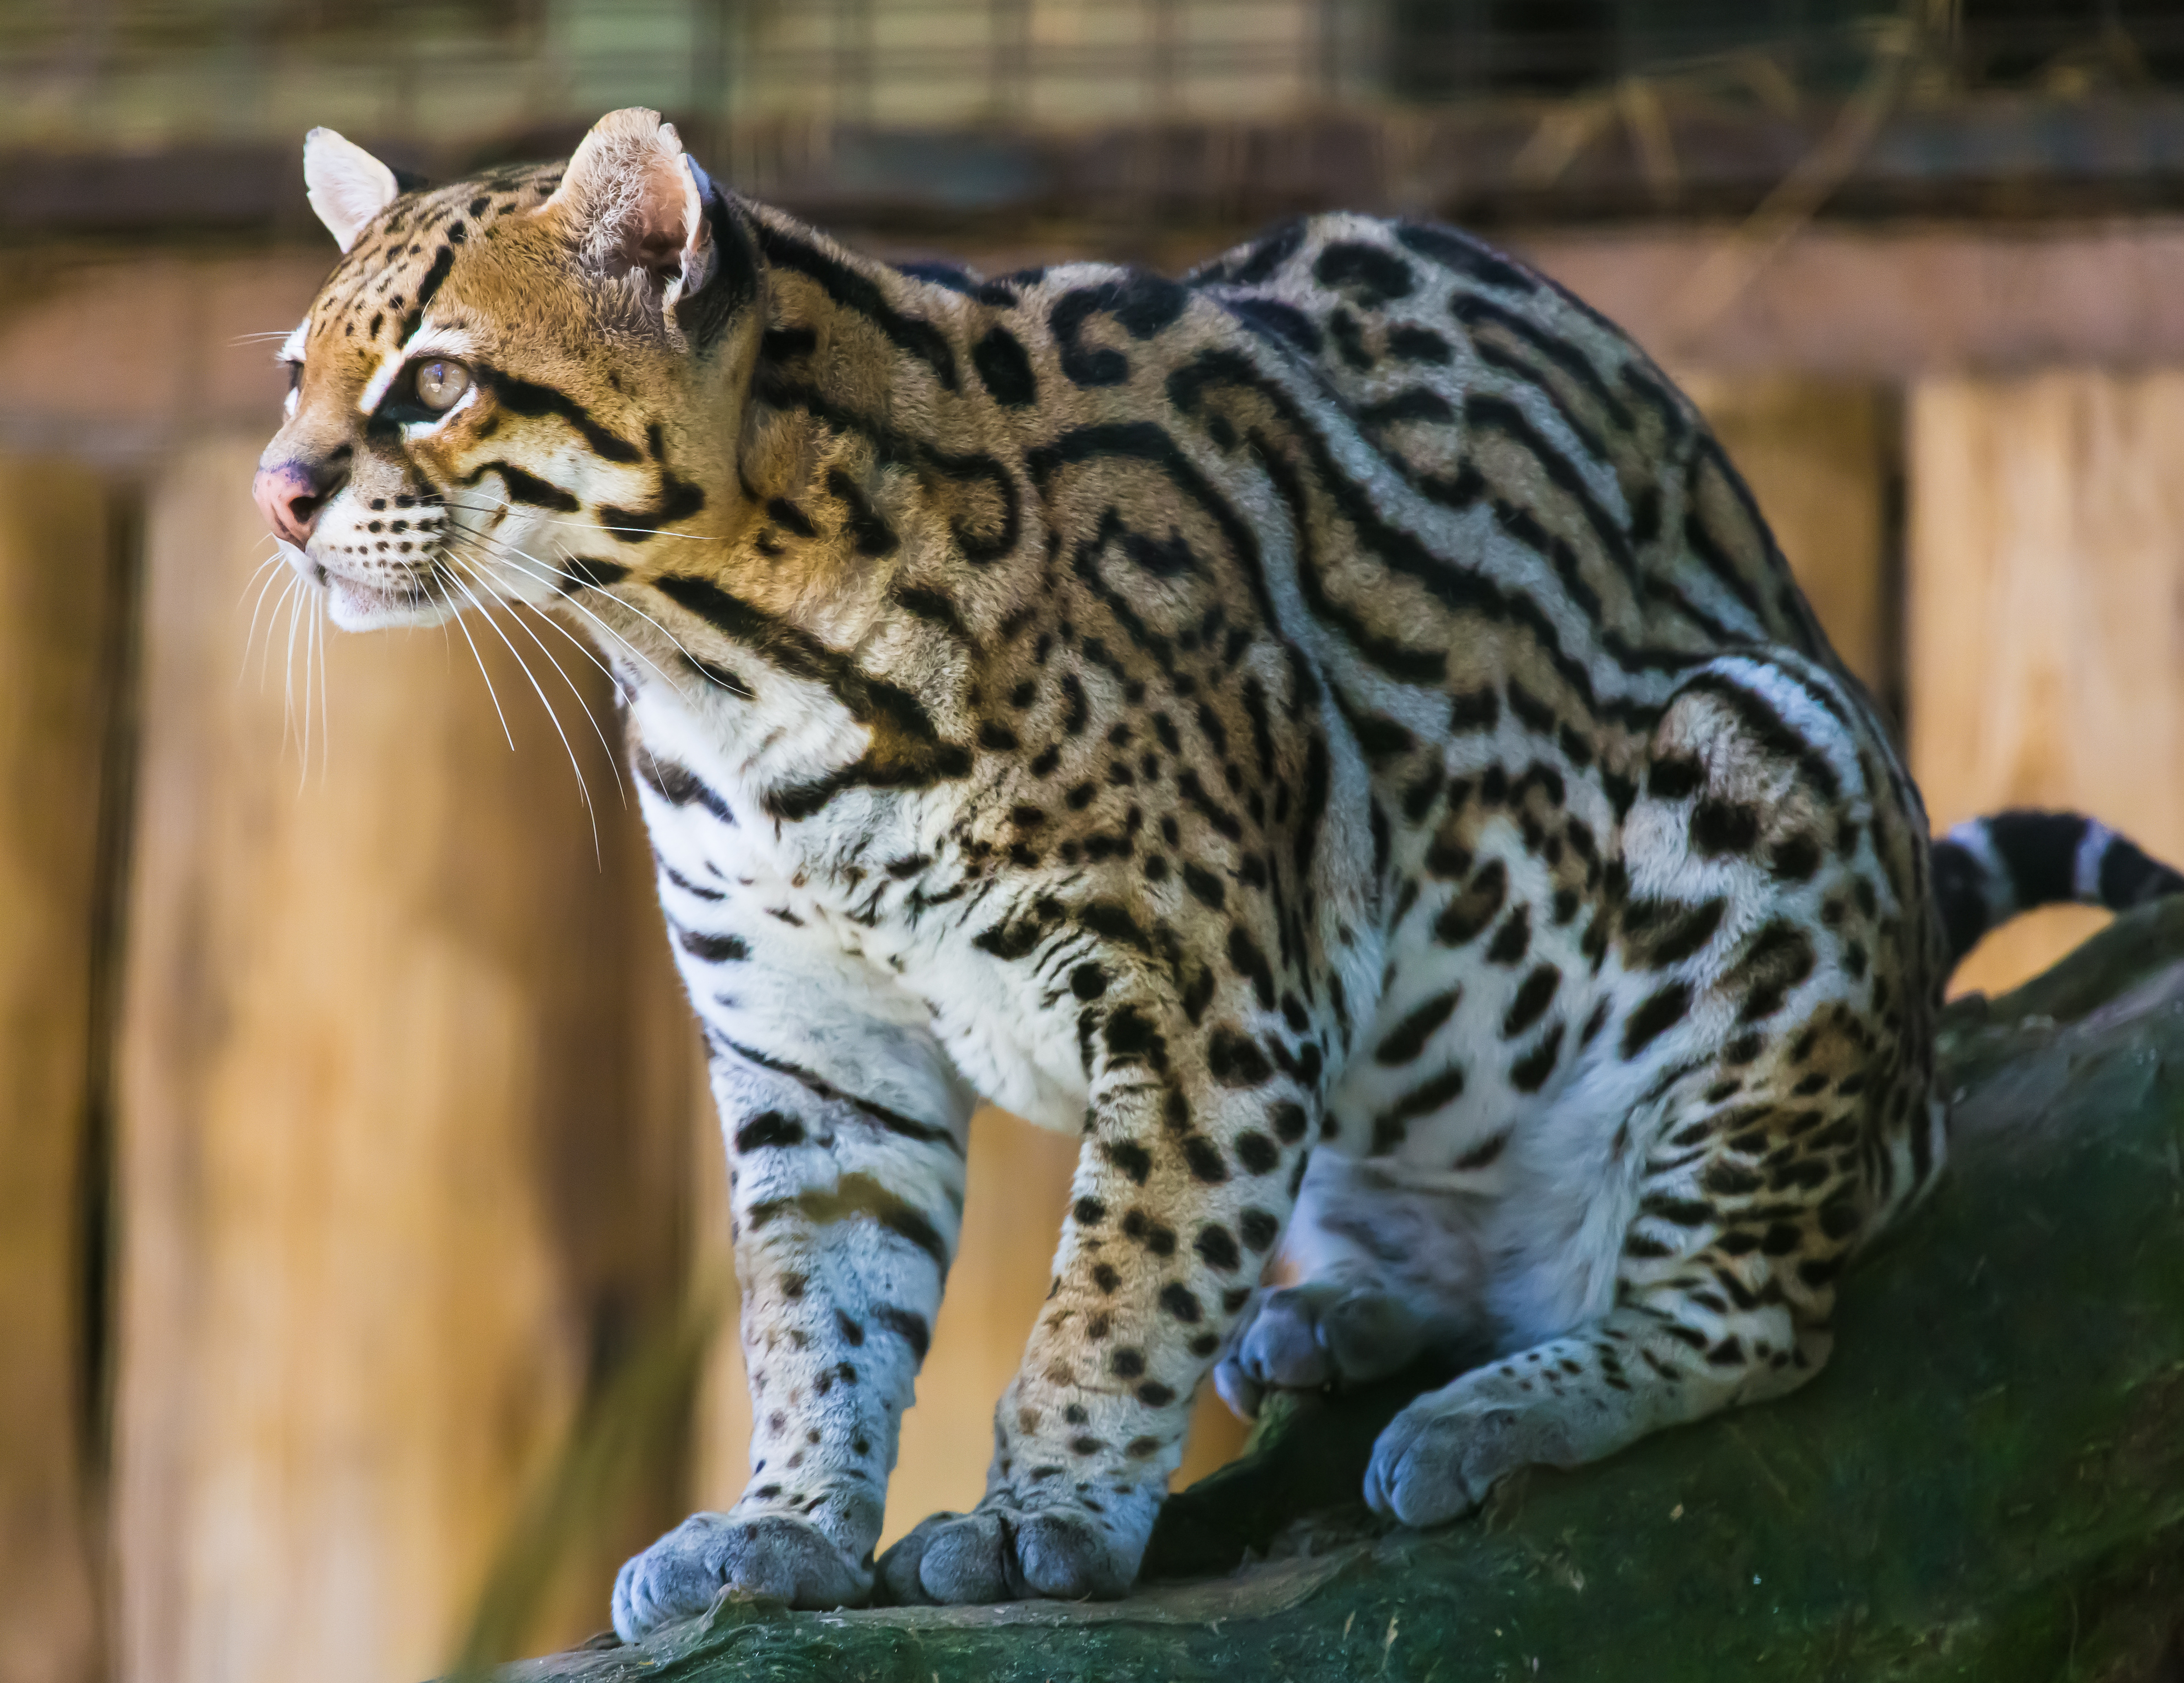 What colors are ocelots?